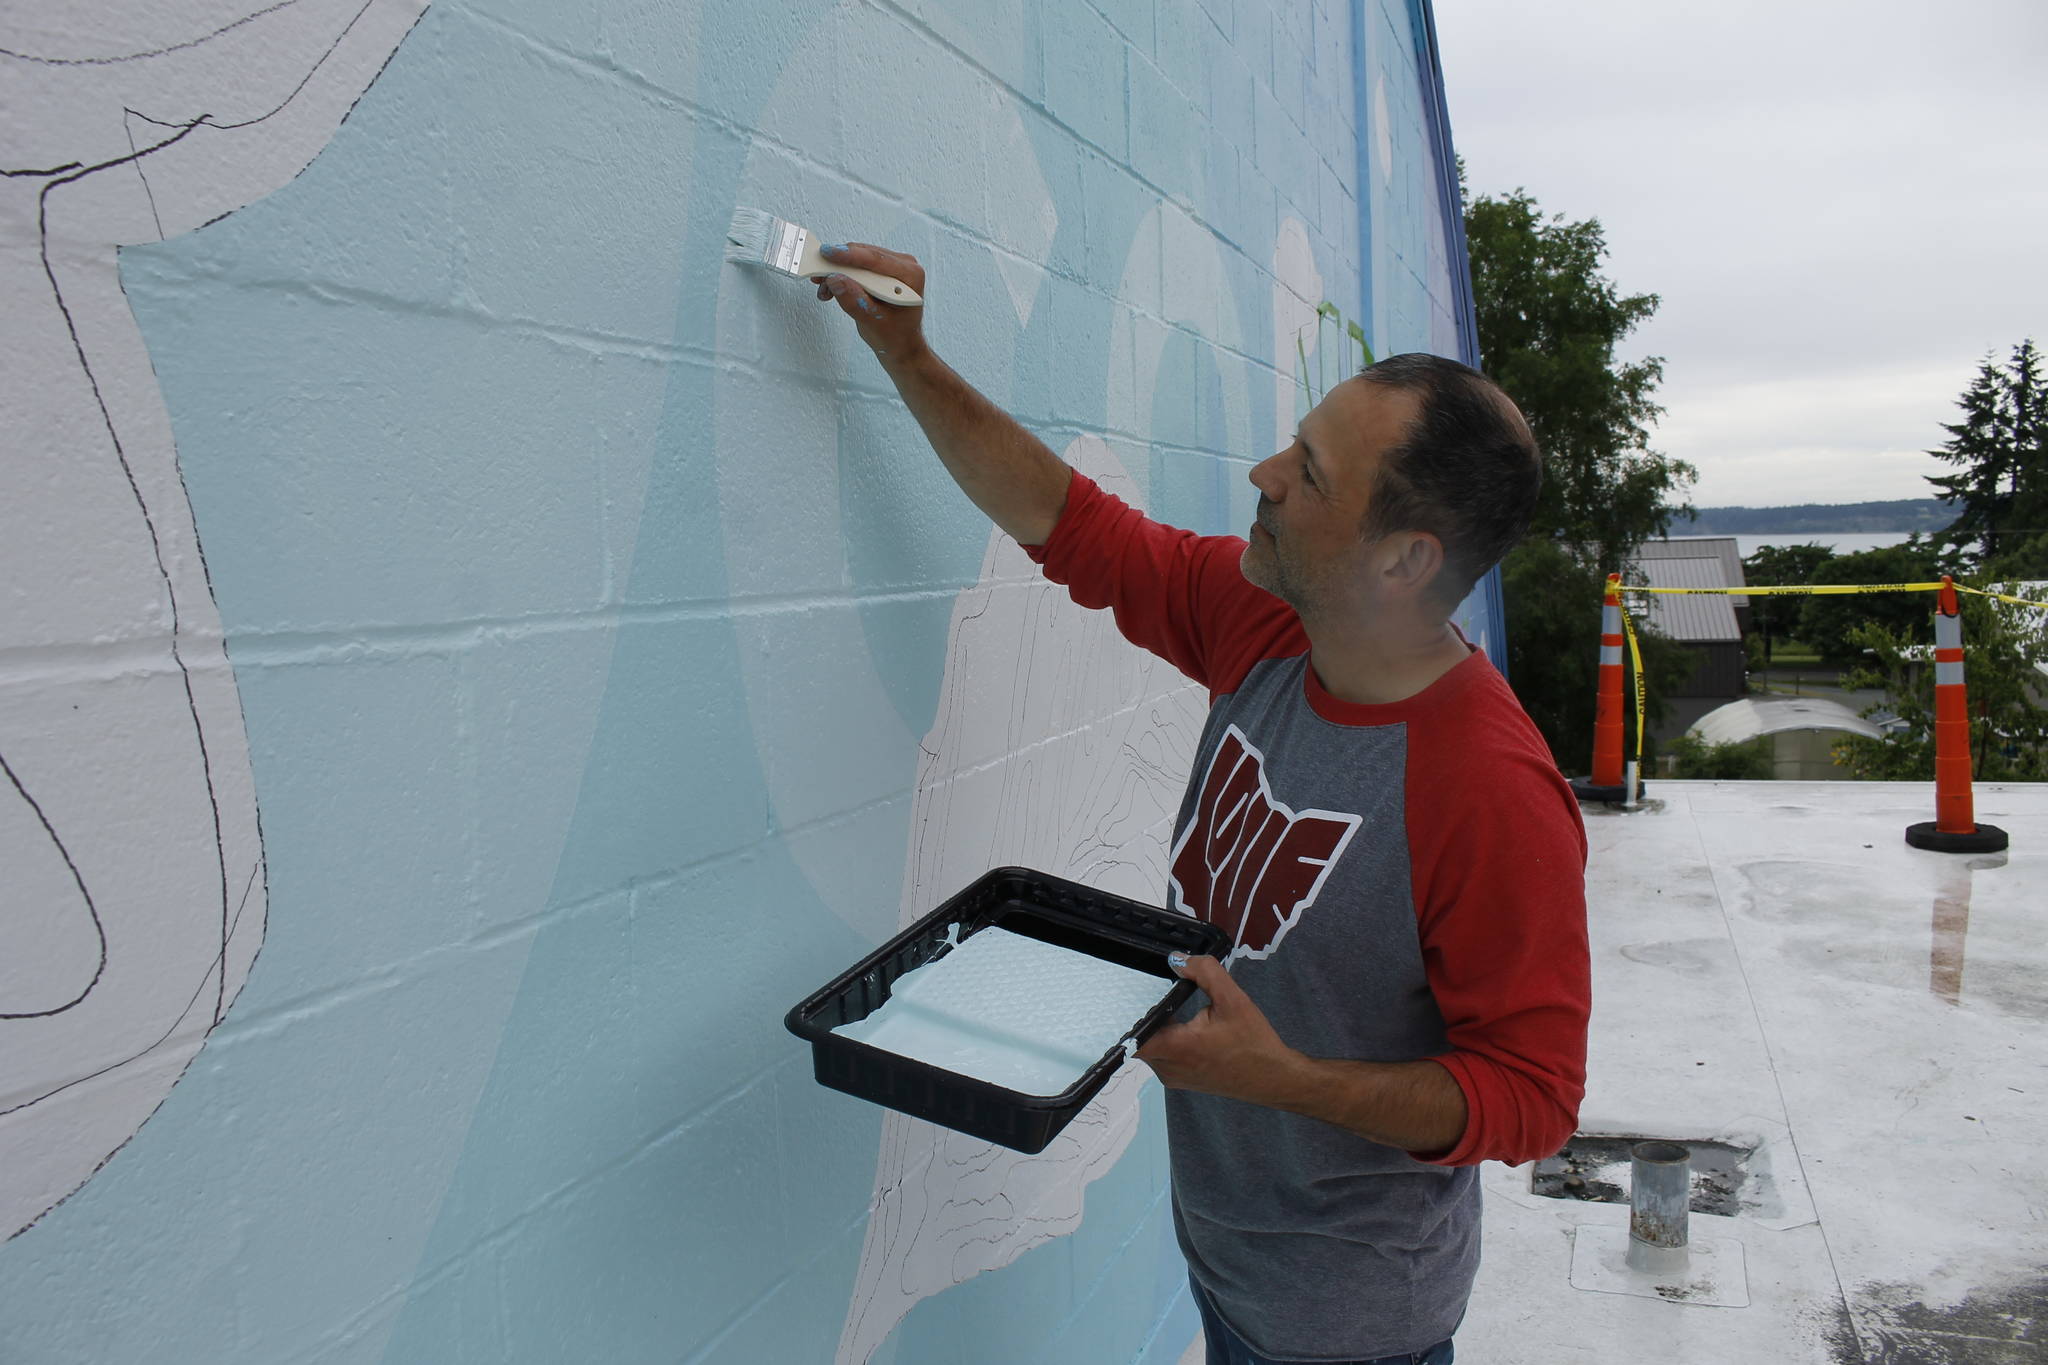 Jeremy Jarvis works on his mural in Langley. (Photo by Kira Erickson/Whidbey News-Times)